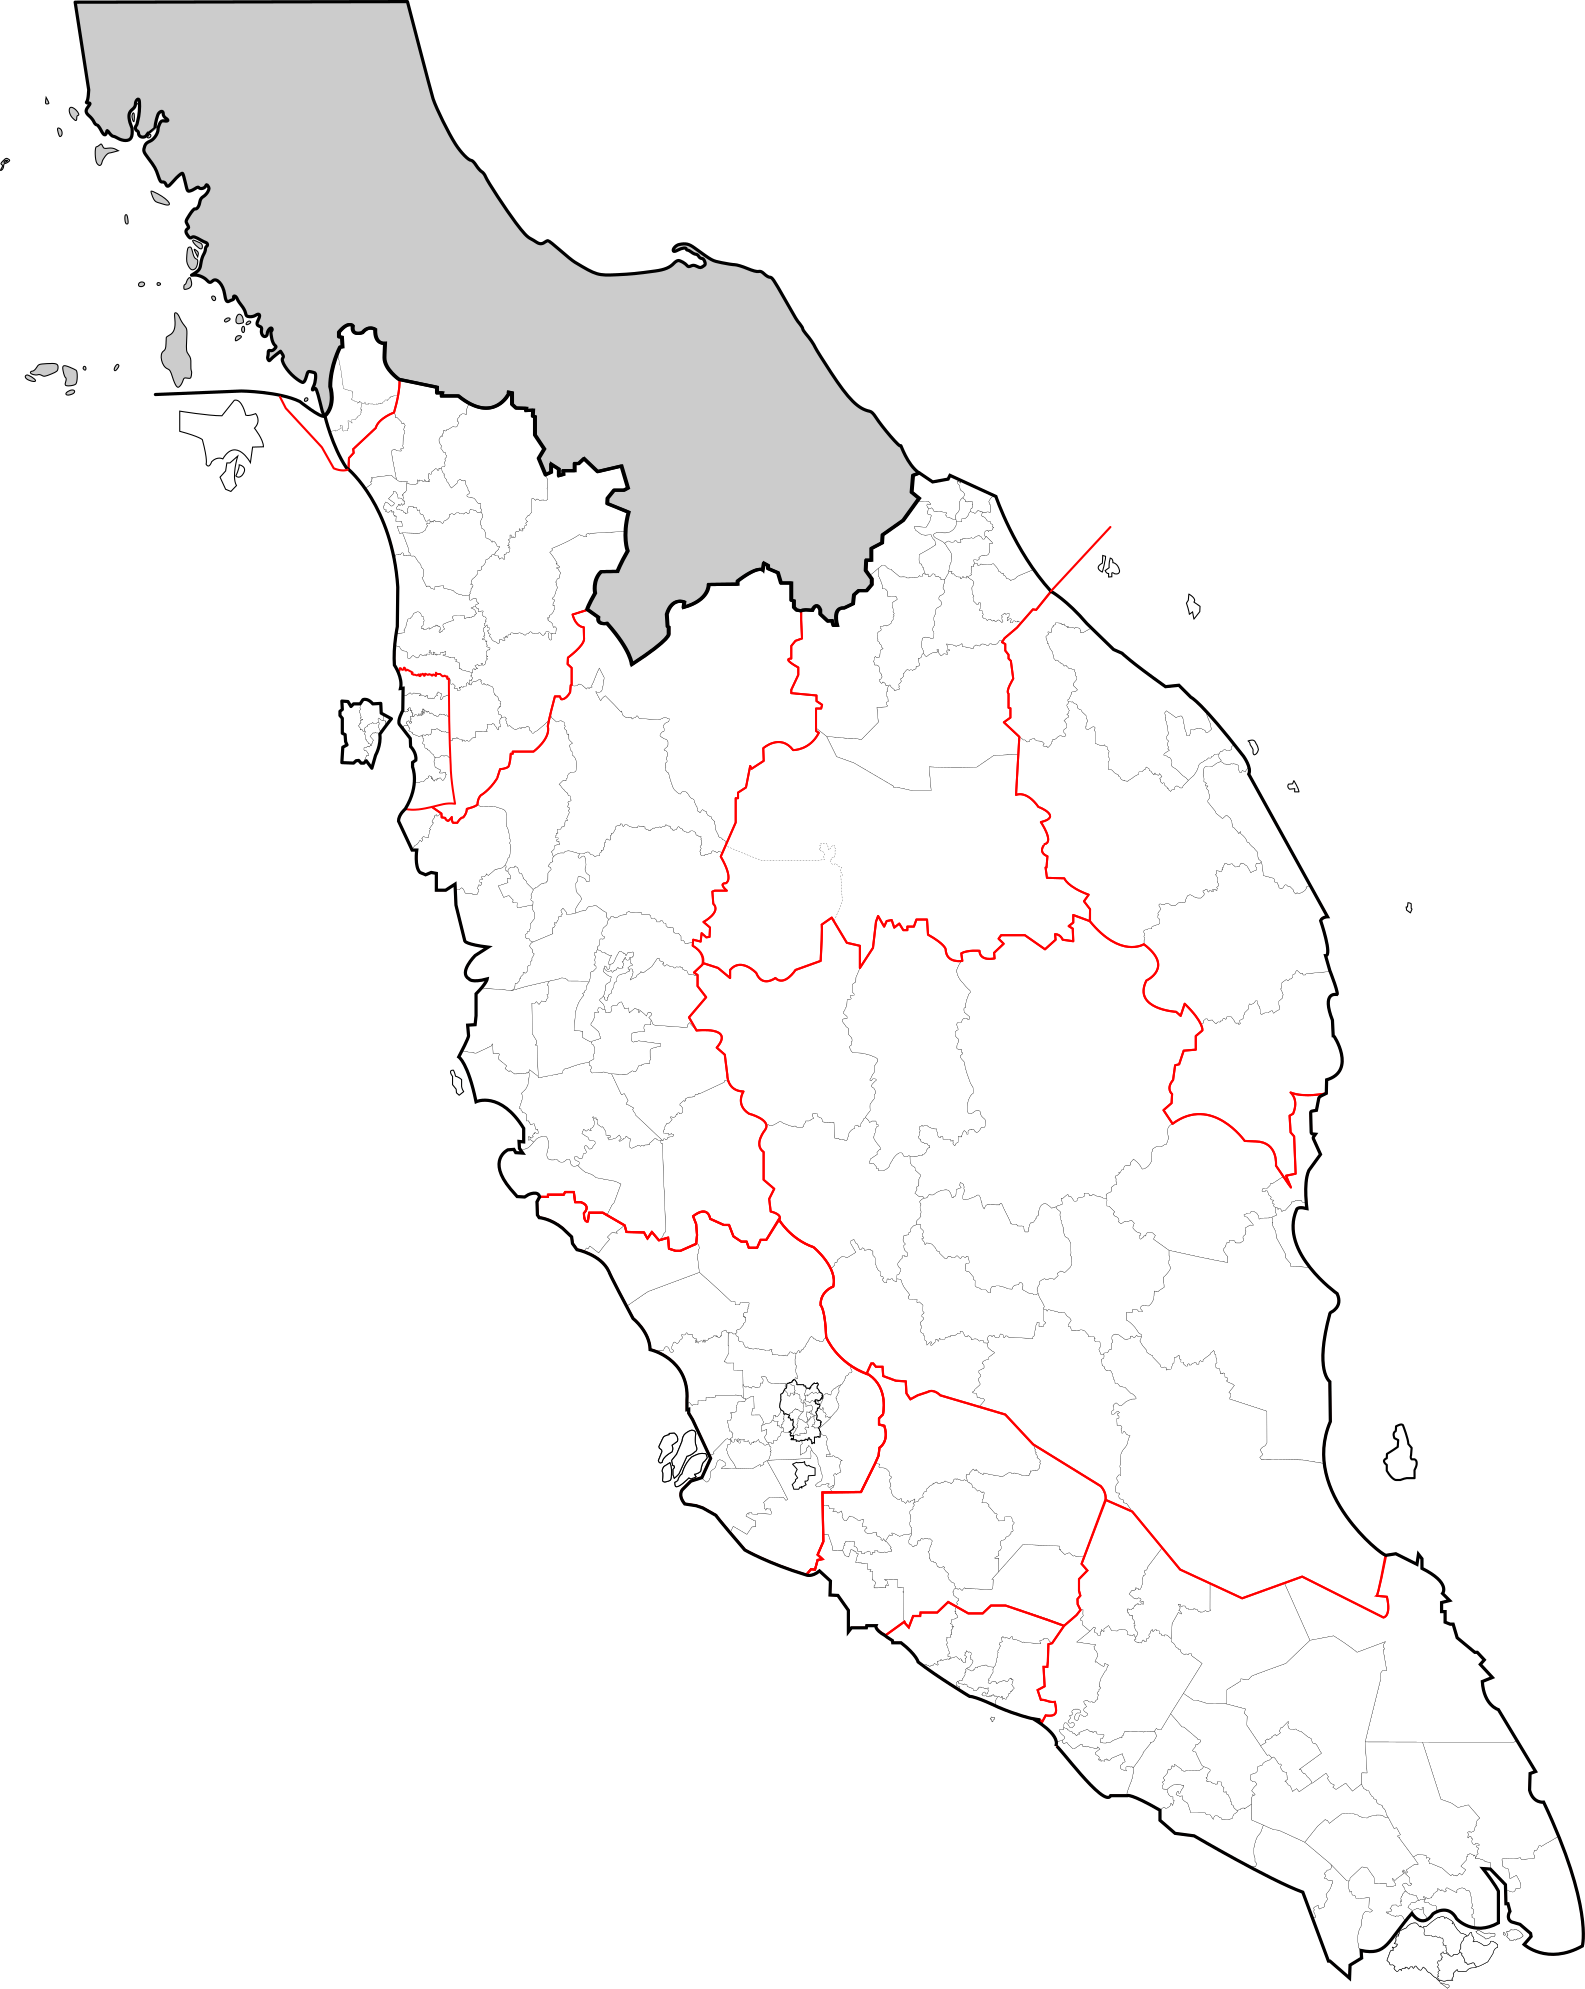 Other west malaysia